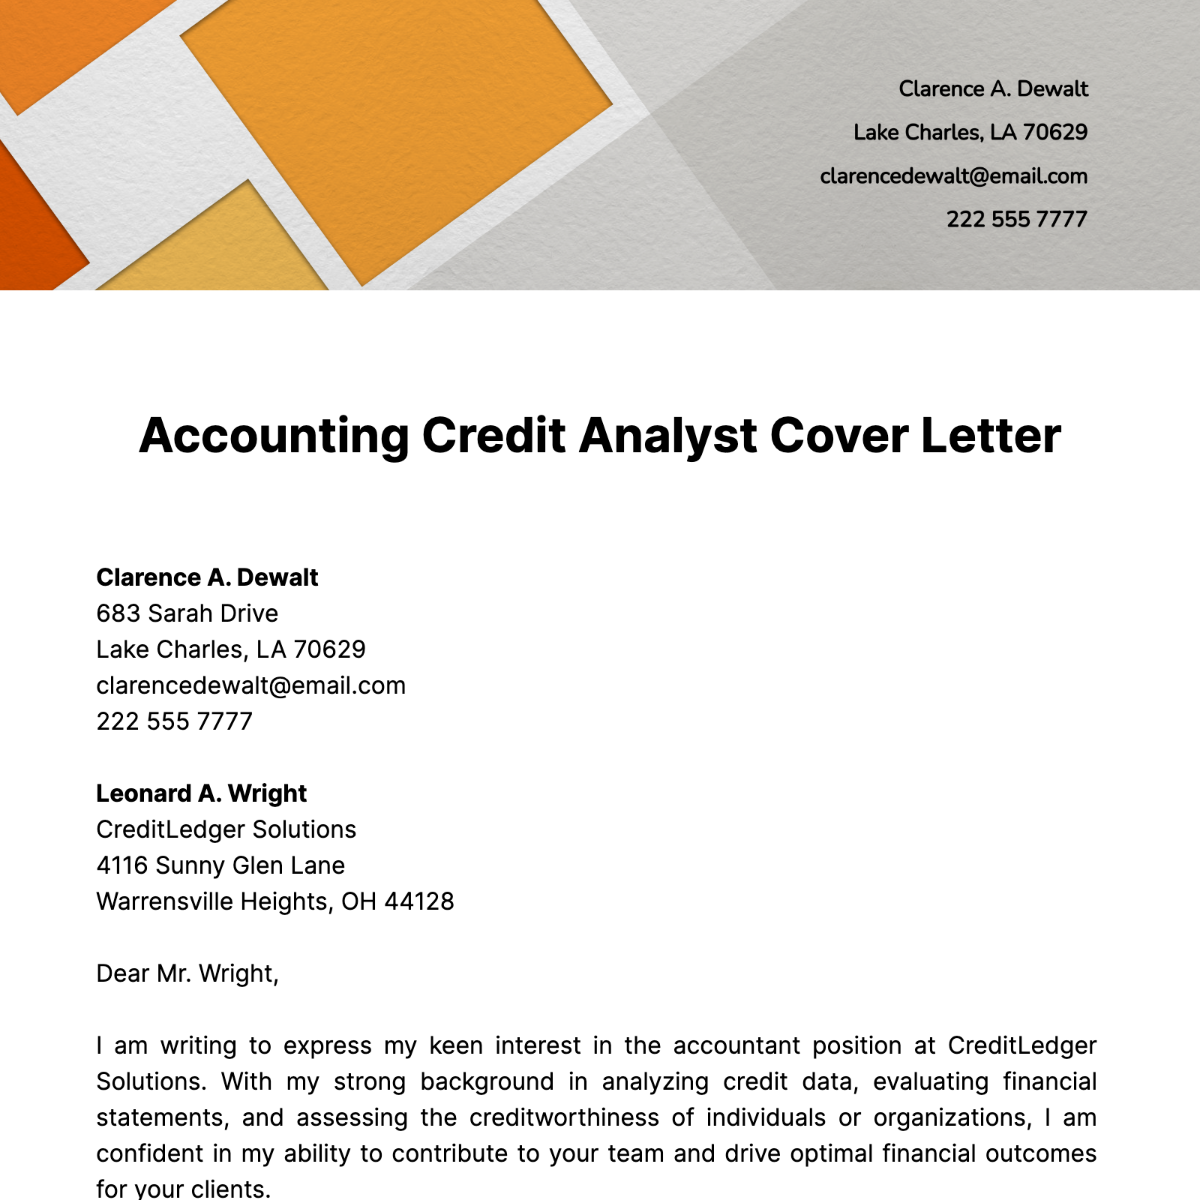 Accounting Credit Analyst Cover Letter Template